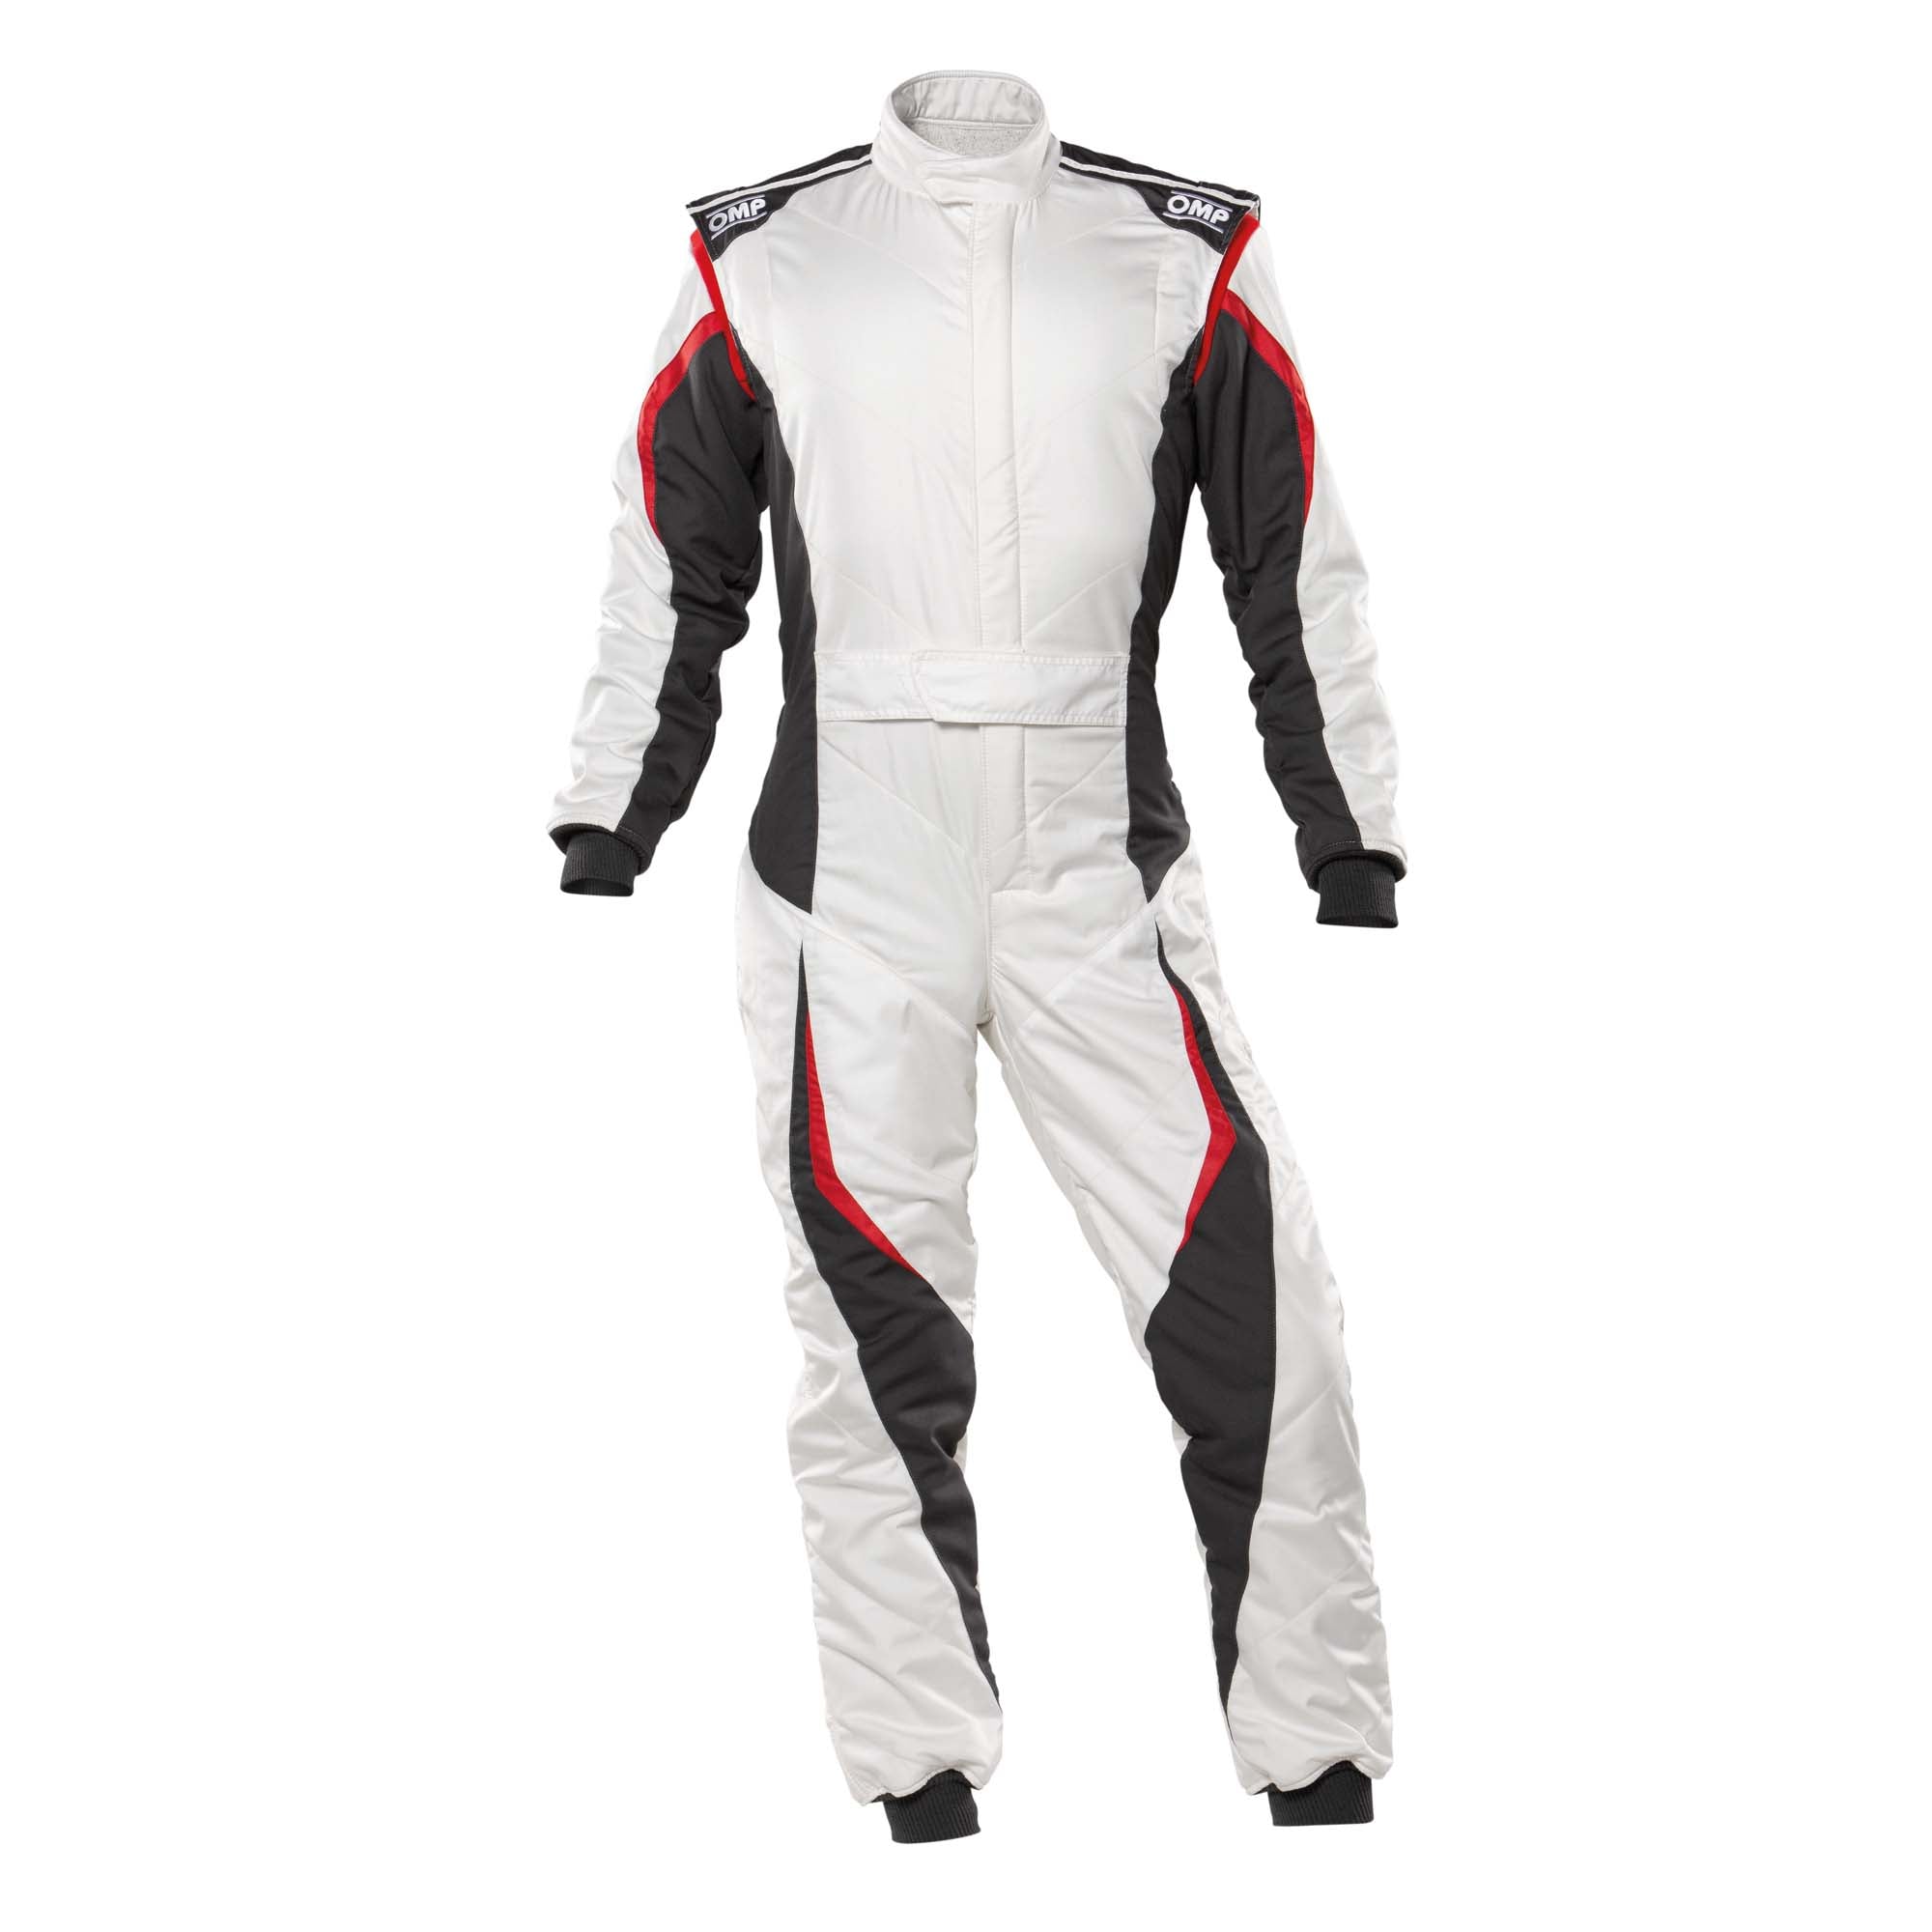 OMP Tecnica Evo Racing Suit - White/Anthracite